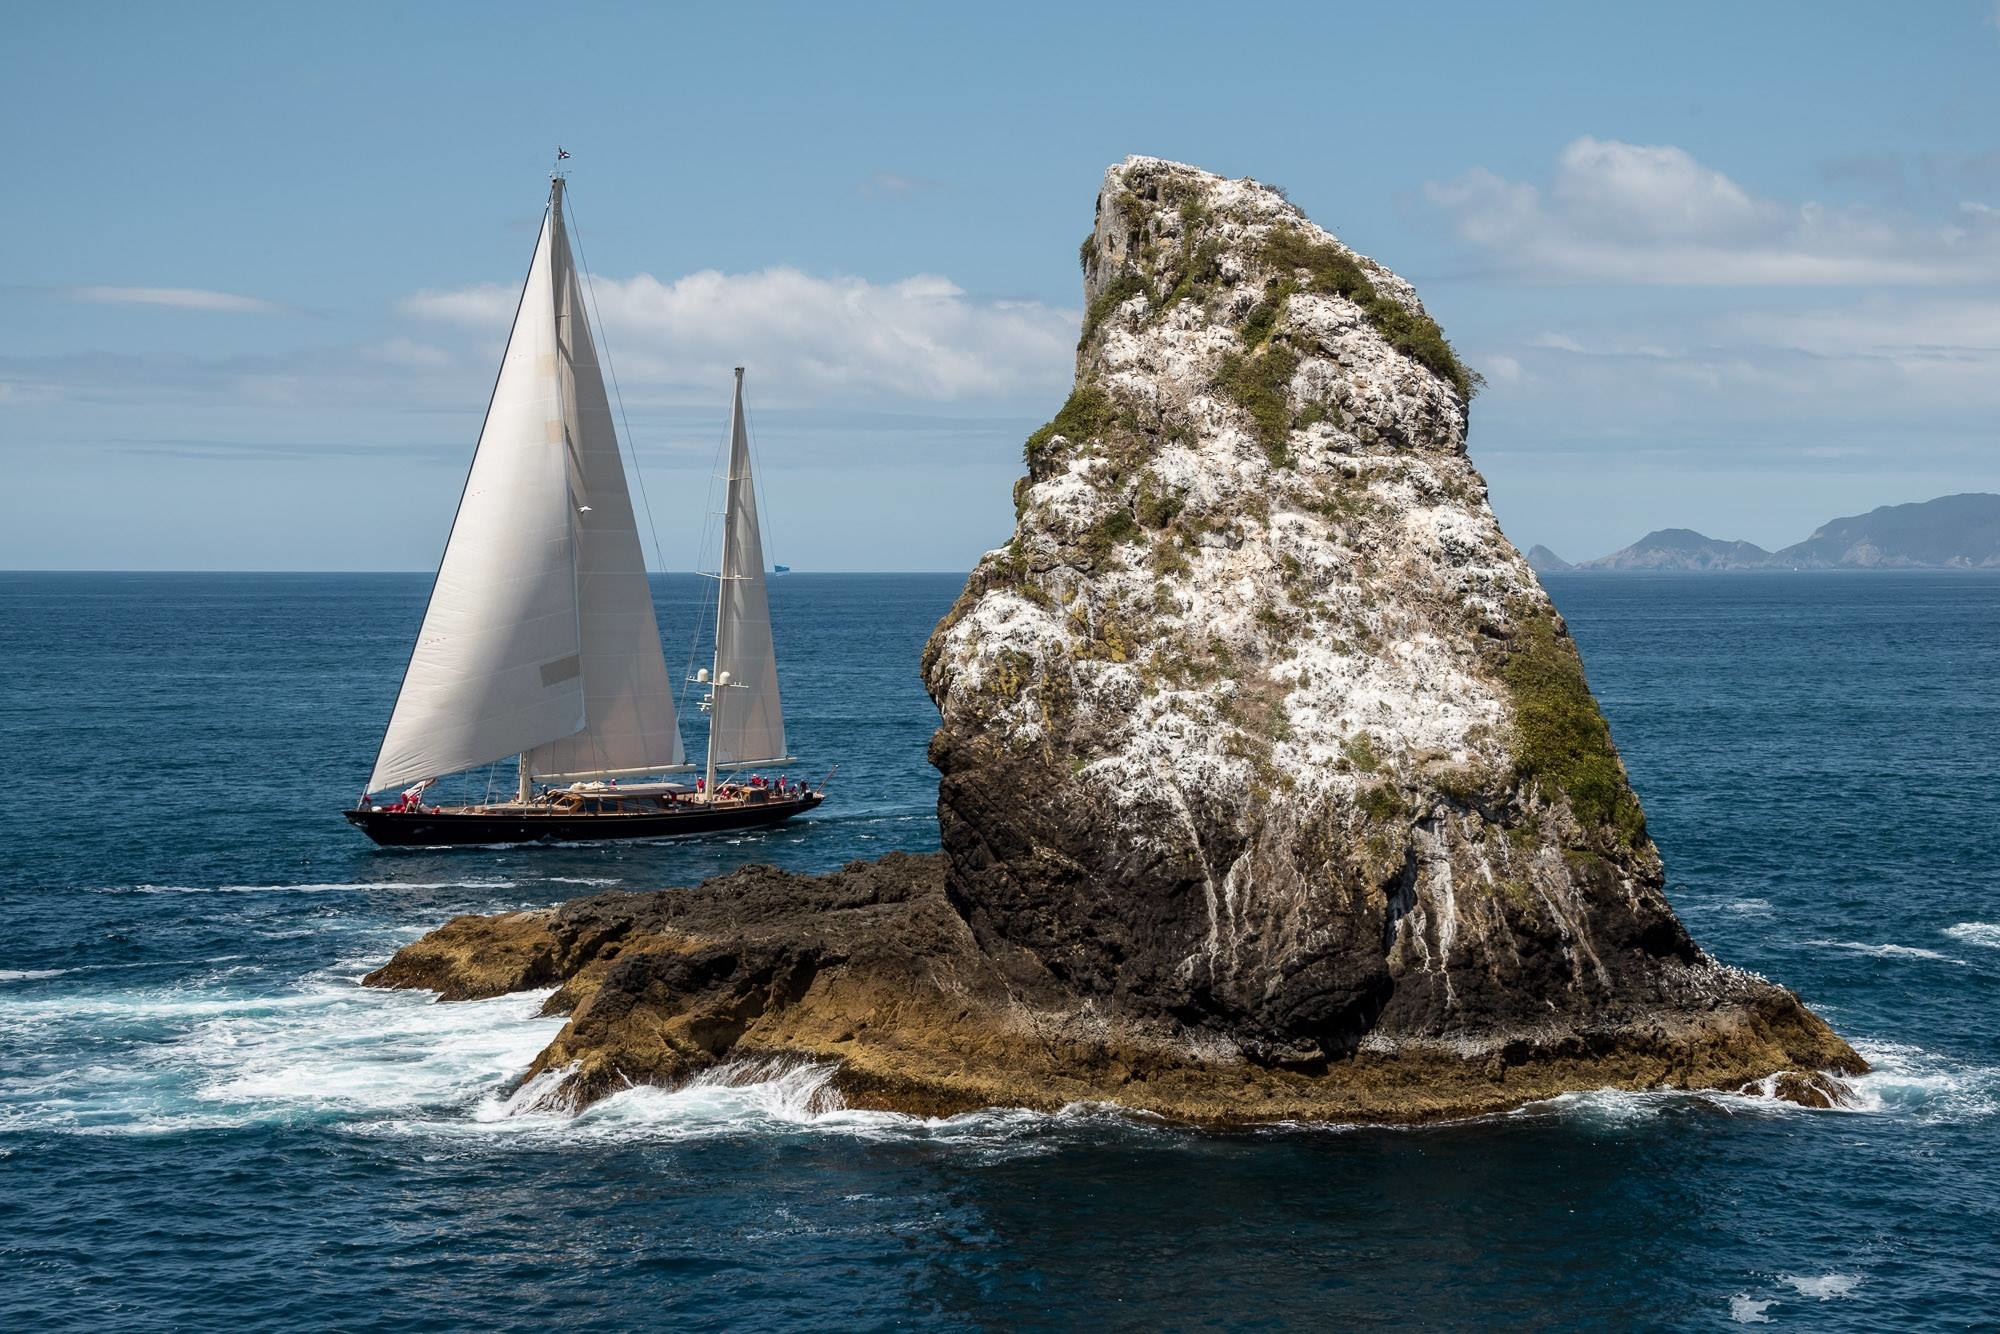 The islands between which the organizers of the race paved the routes partially replaced the artificial milestones for yachtsmen.